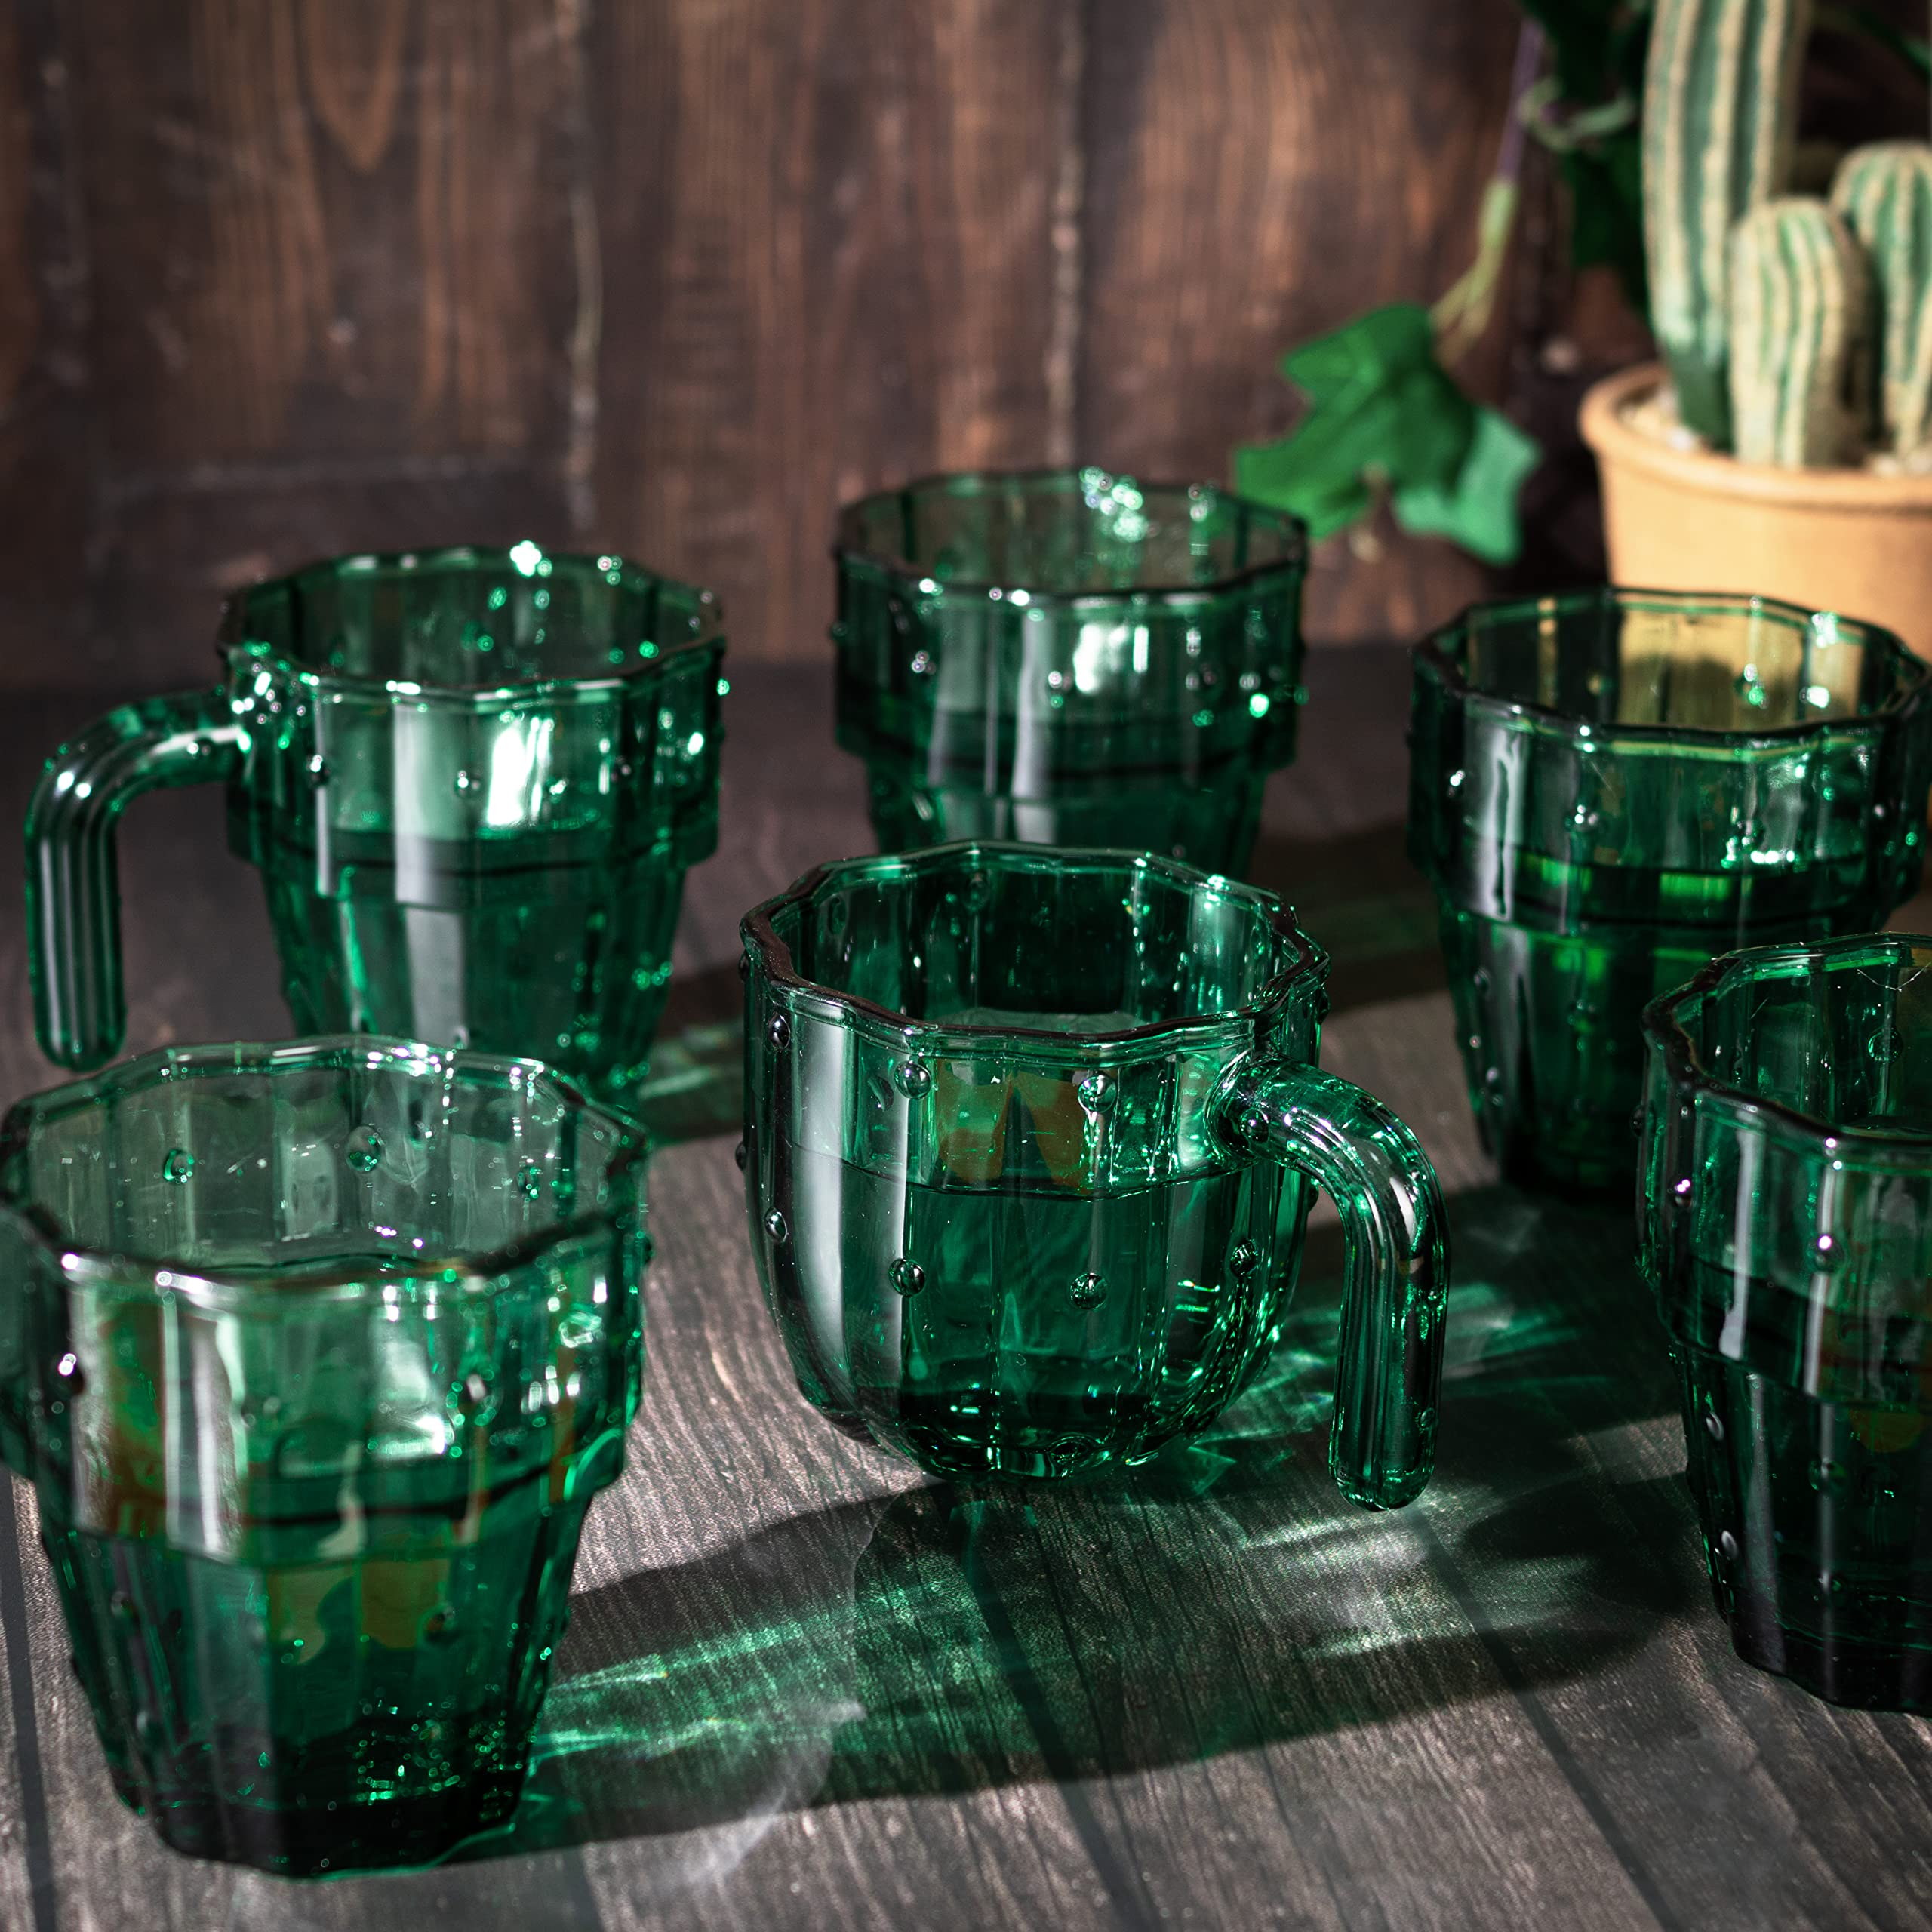 Cactus Stackable Glasses, Stacktus Gifts, Set of 6-10 oz Cactus Shape Glasses With Handles Green Glass Blown Figurines Plant Decorations for Parties 5" H 5" W - Copyright Design, Patent Pending